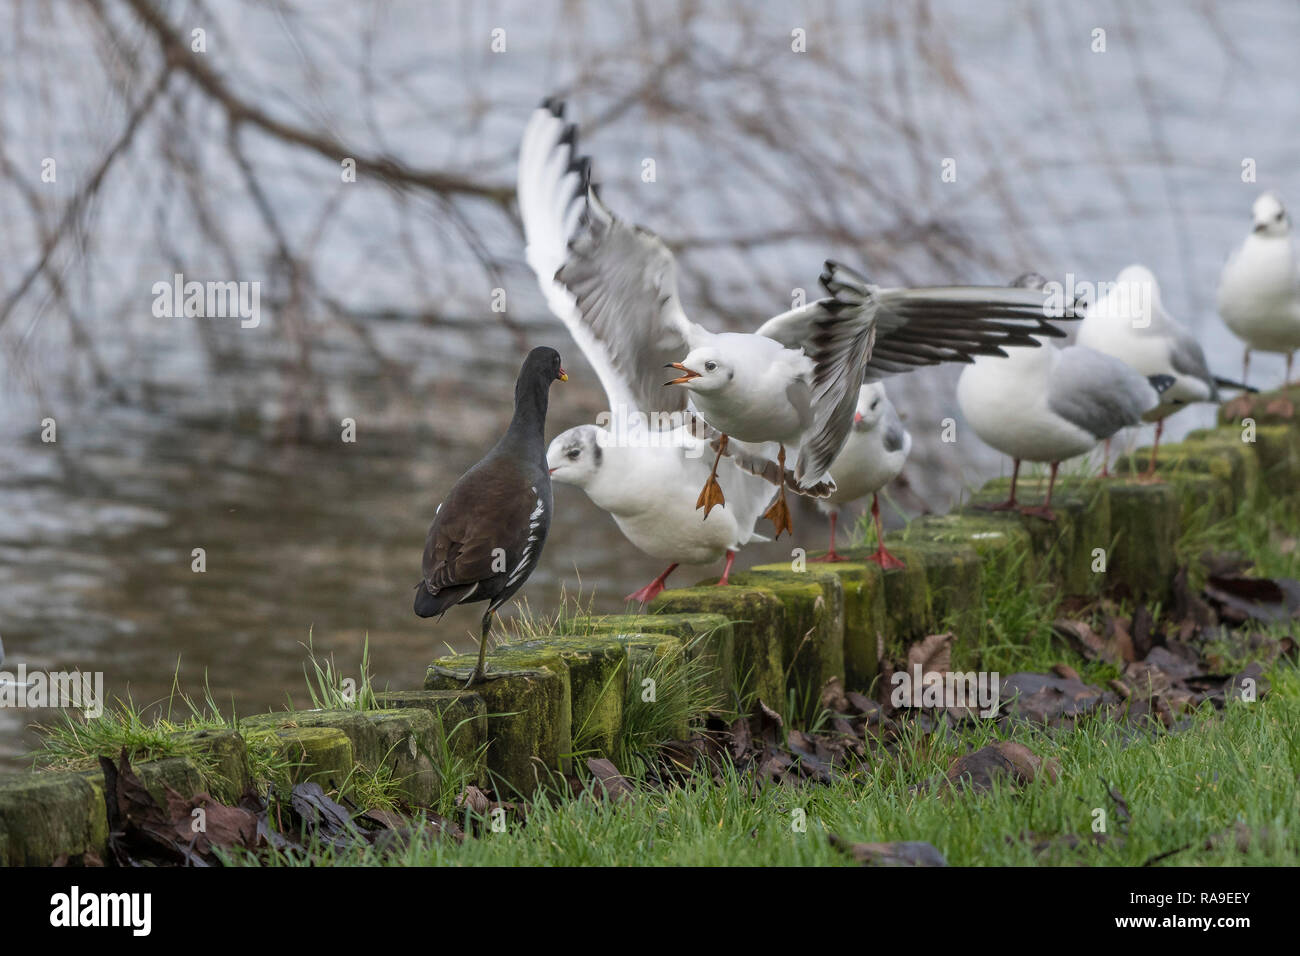 An aggressive Black headed Gull Chroicocephalus ridibundus in its winter plumage confronting a Moorhen Gallinula chloropus at the side of a lake. Stock Photo